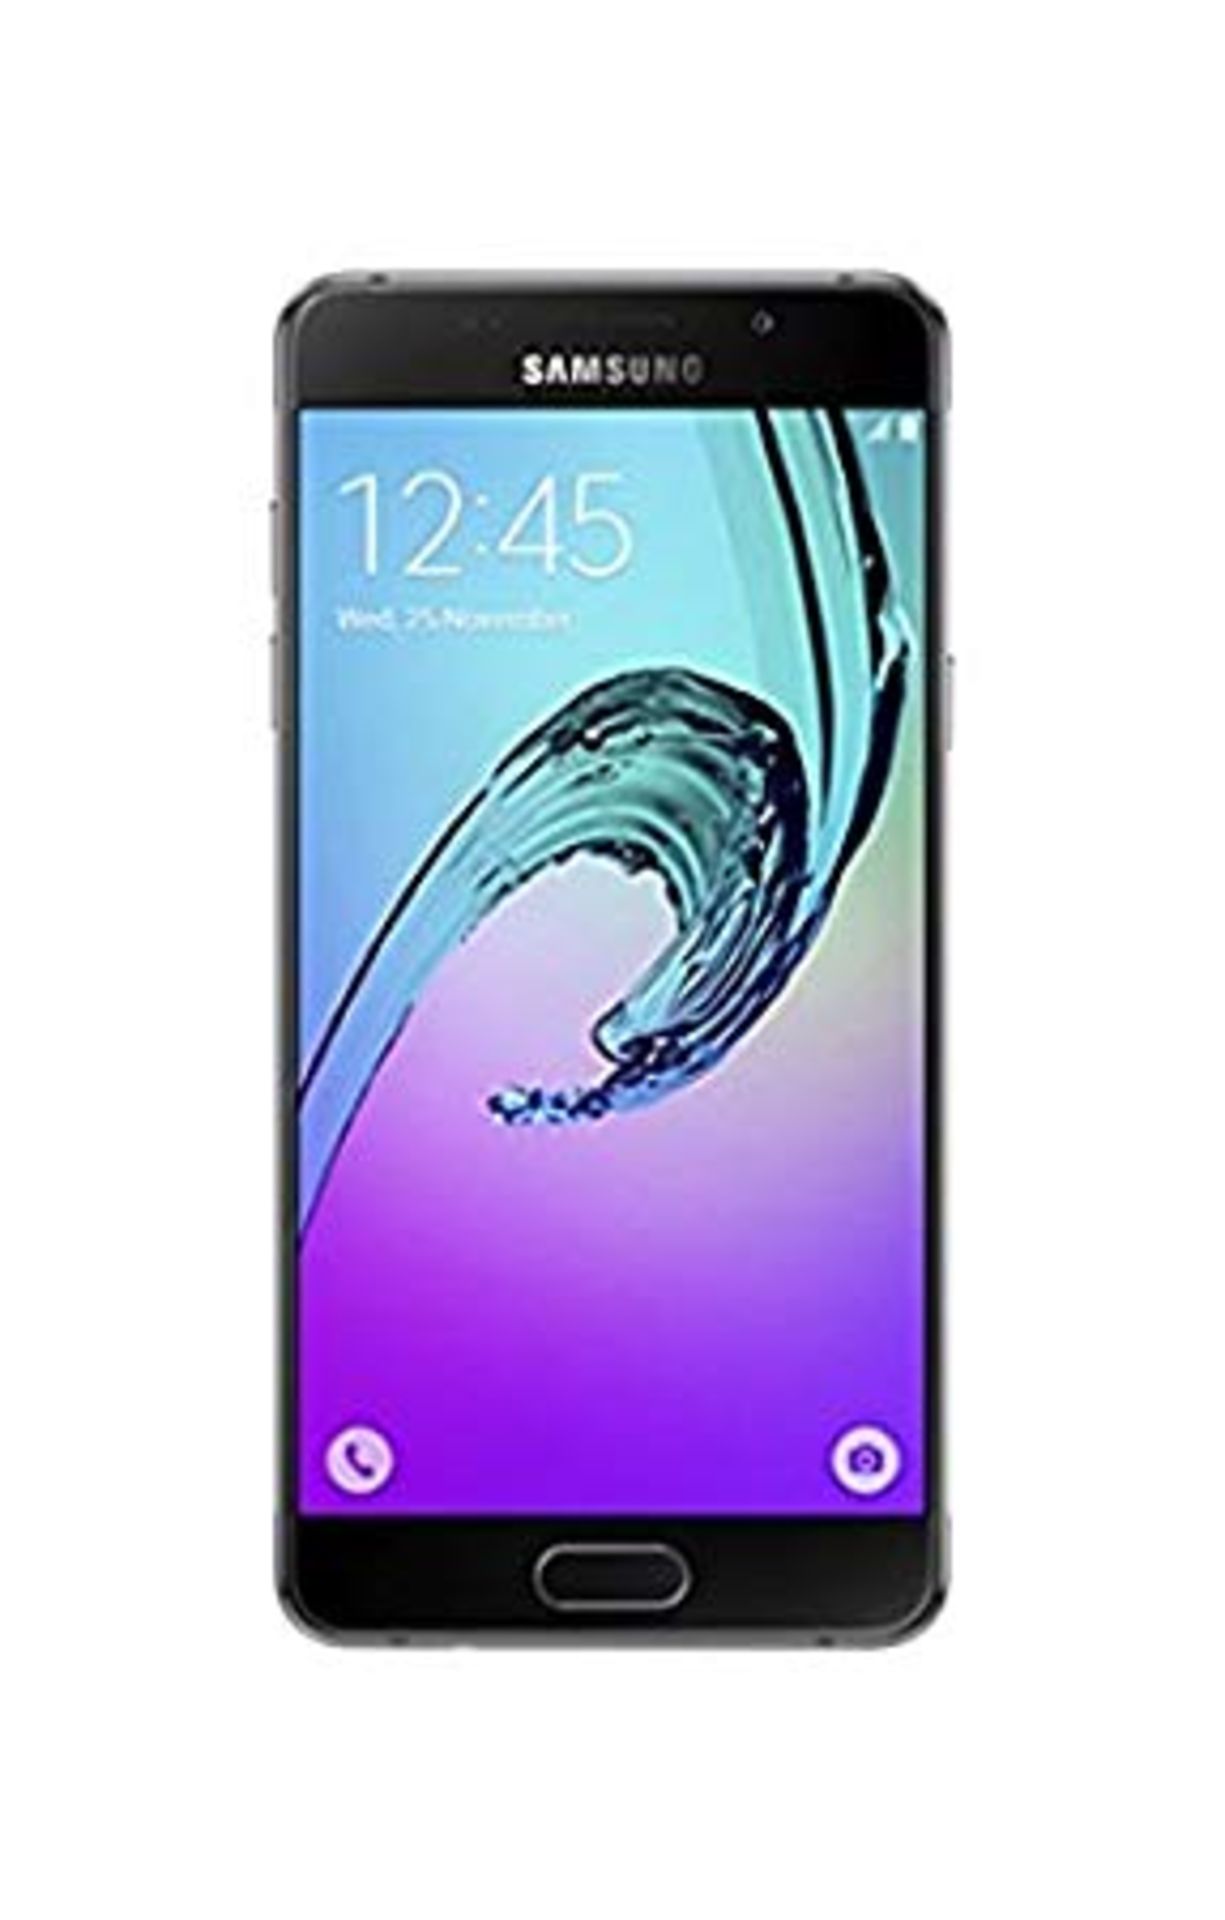 Grade A Samsung A5 ( A510F ) Colours May Vary Item available approx 12 working days after sale